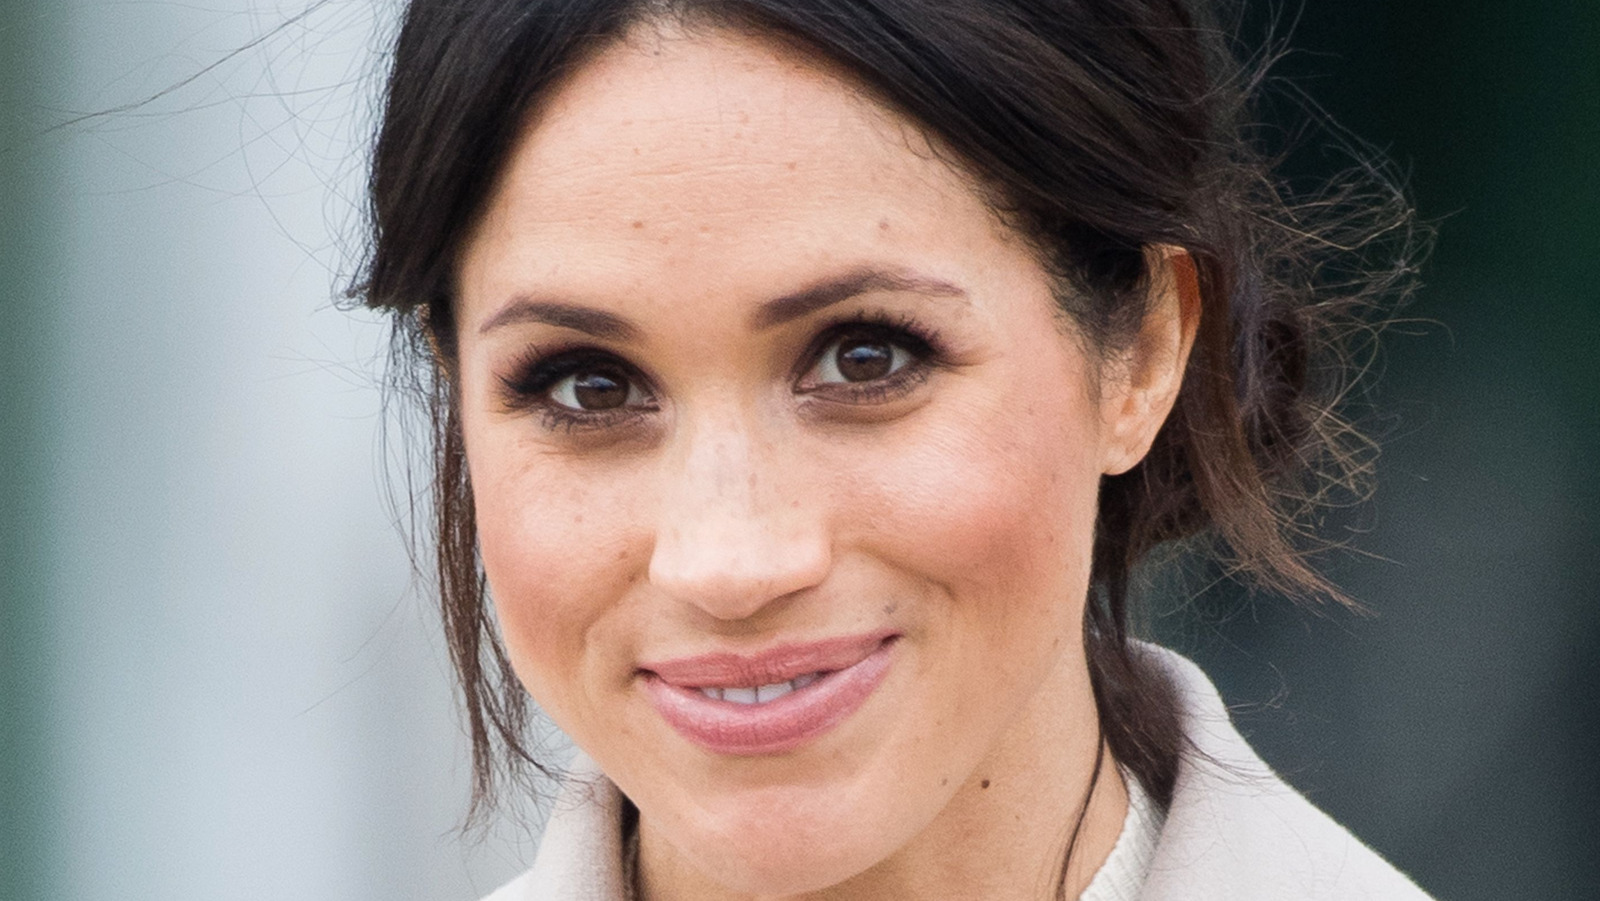 Meghan Markle Looks Classically Chic on Her Way to Yoga